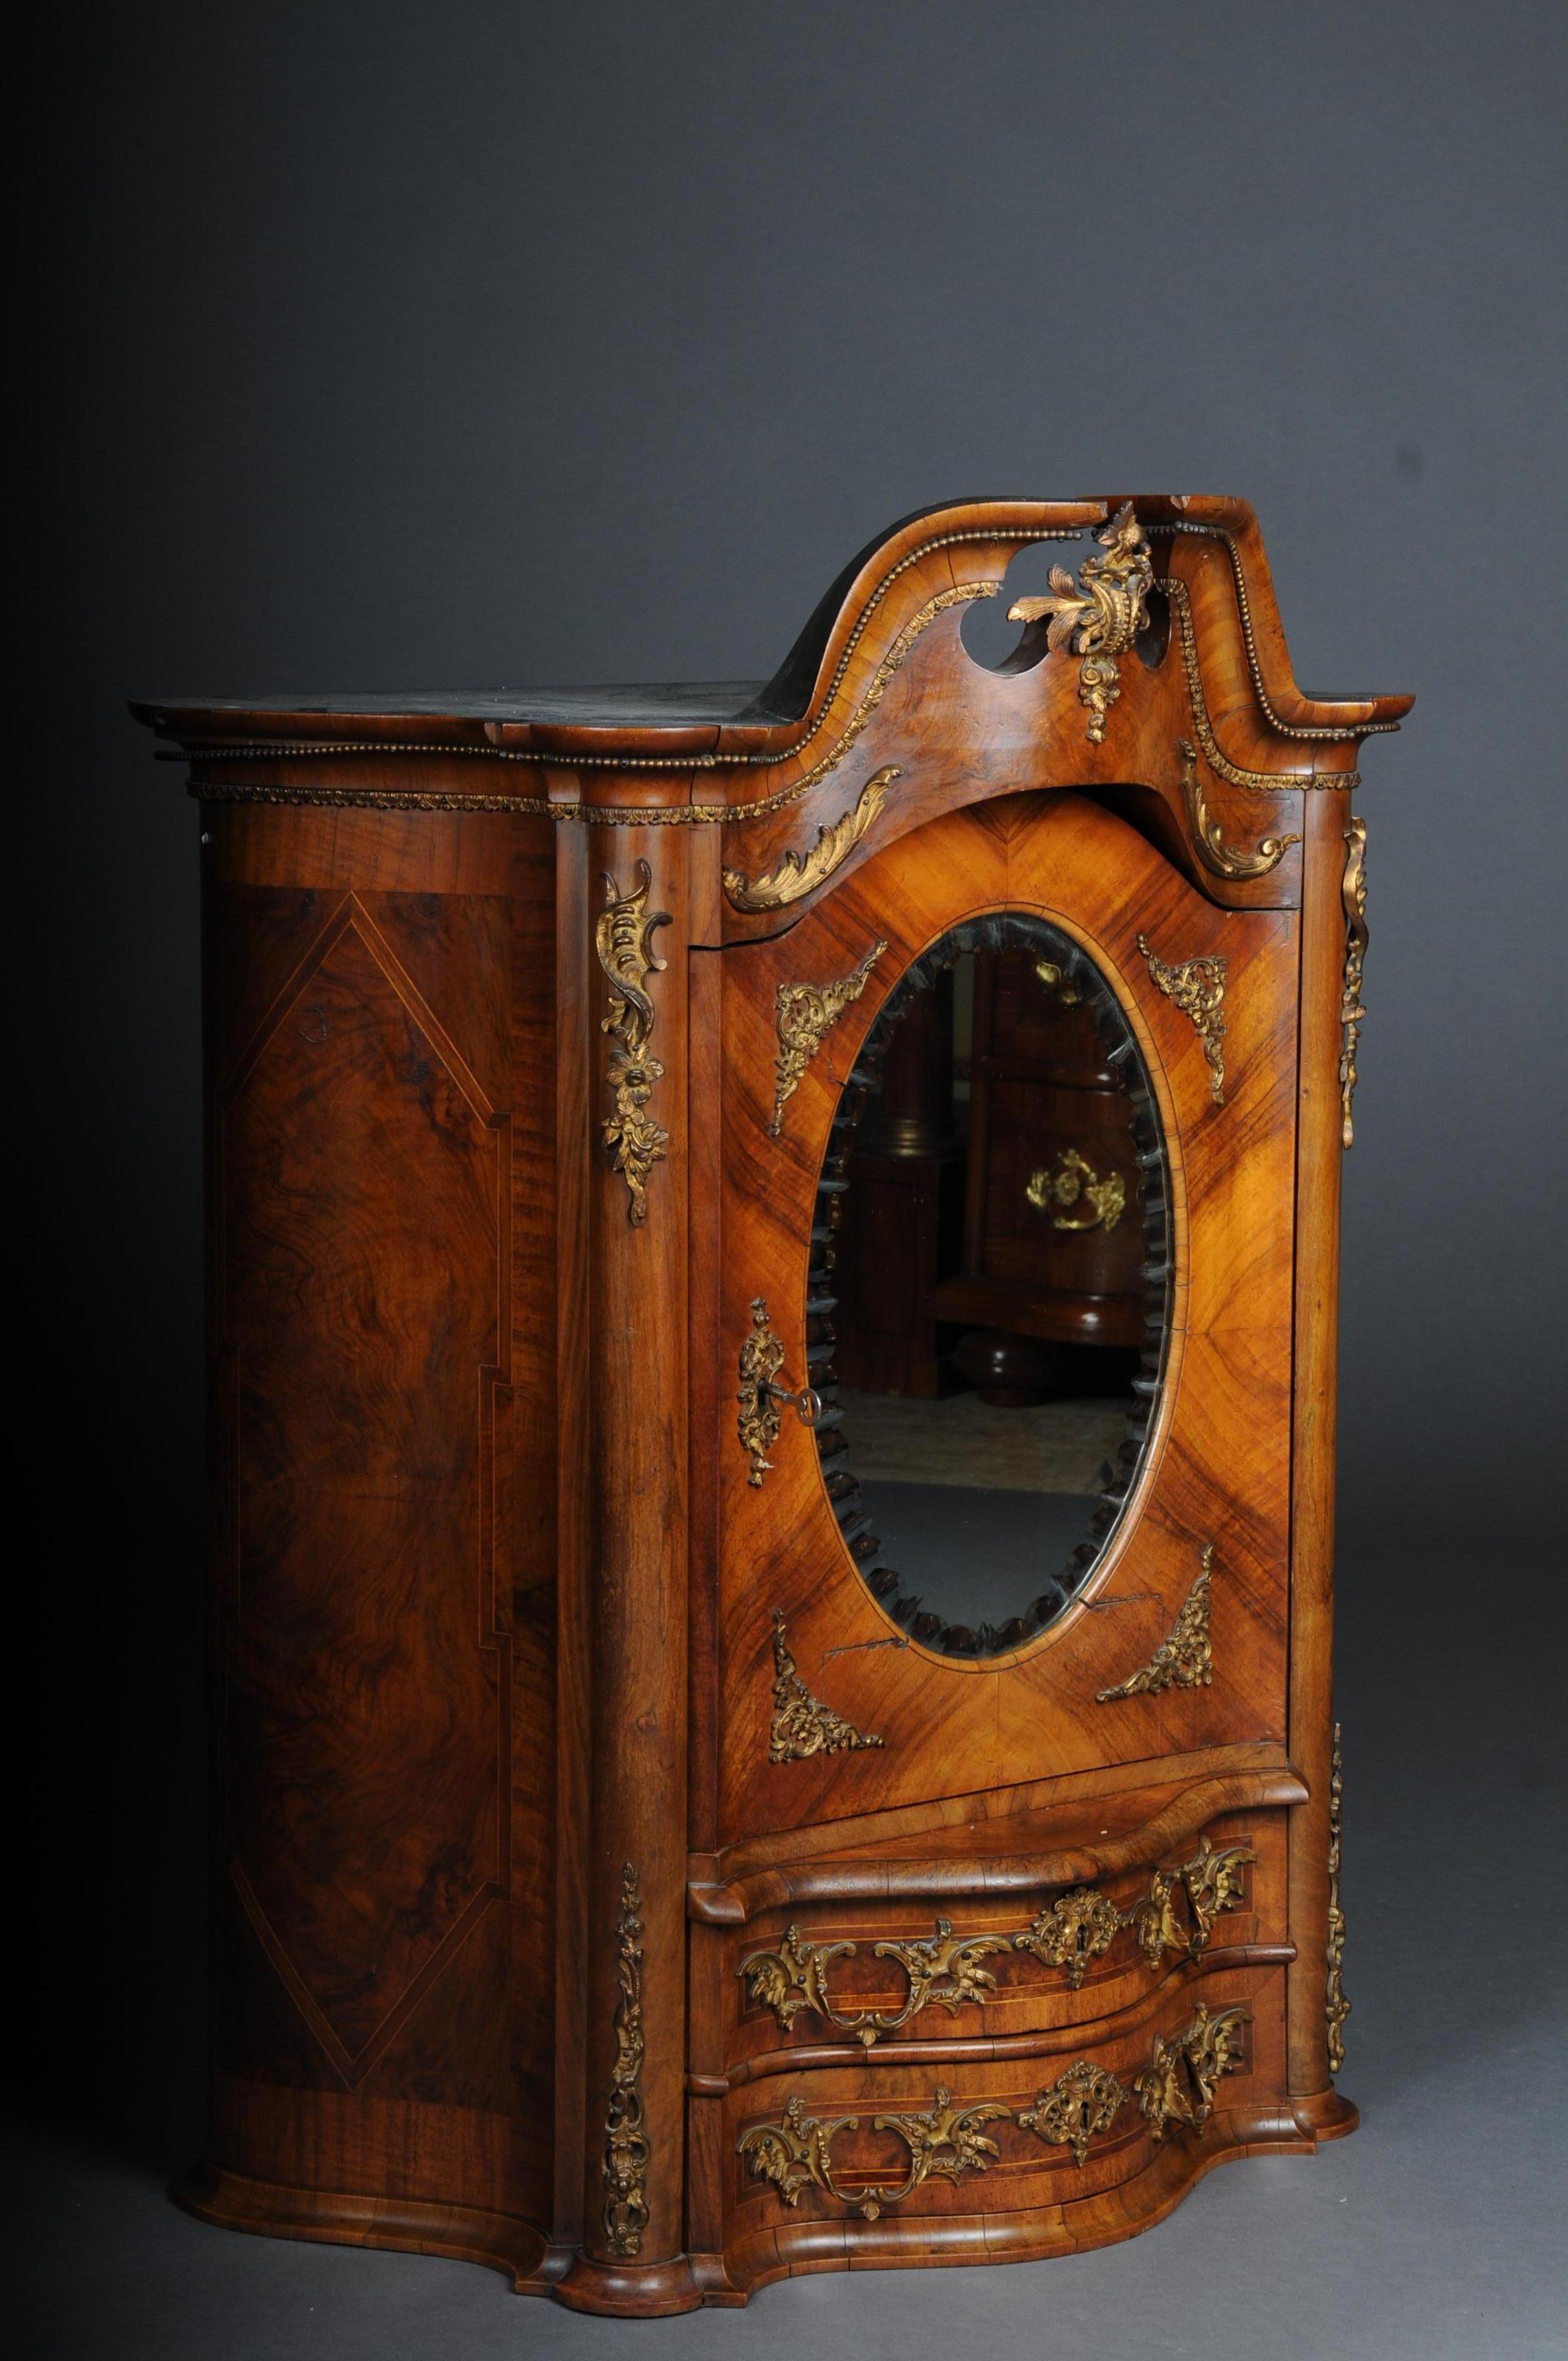 19th century Rococo top cabinet walnut root, Germany 
Walnut root veneer on solid wood. Top cabinet with 2-drawer fronts above a door with medallion shaped mirror, faceted. Gold-plated fittings

(O-252).